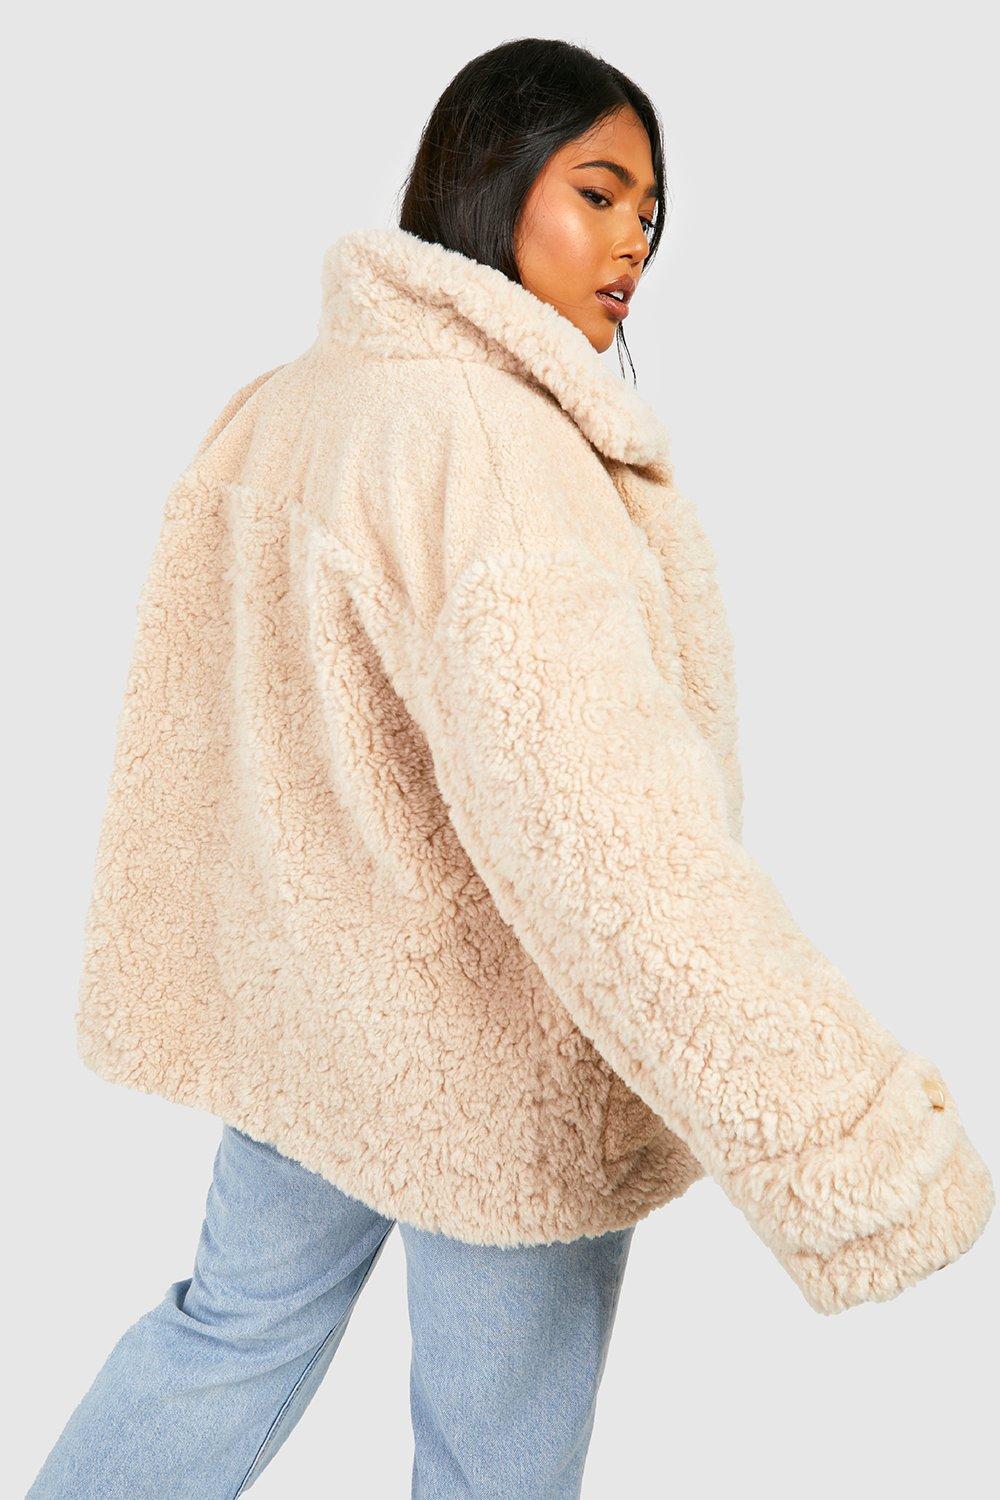 Boohoo Plus Textured Faux Fur Jacket in Natural